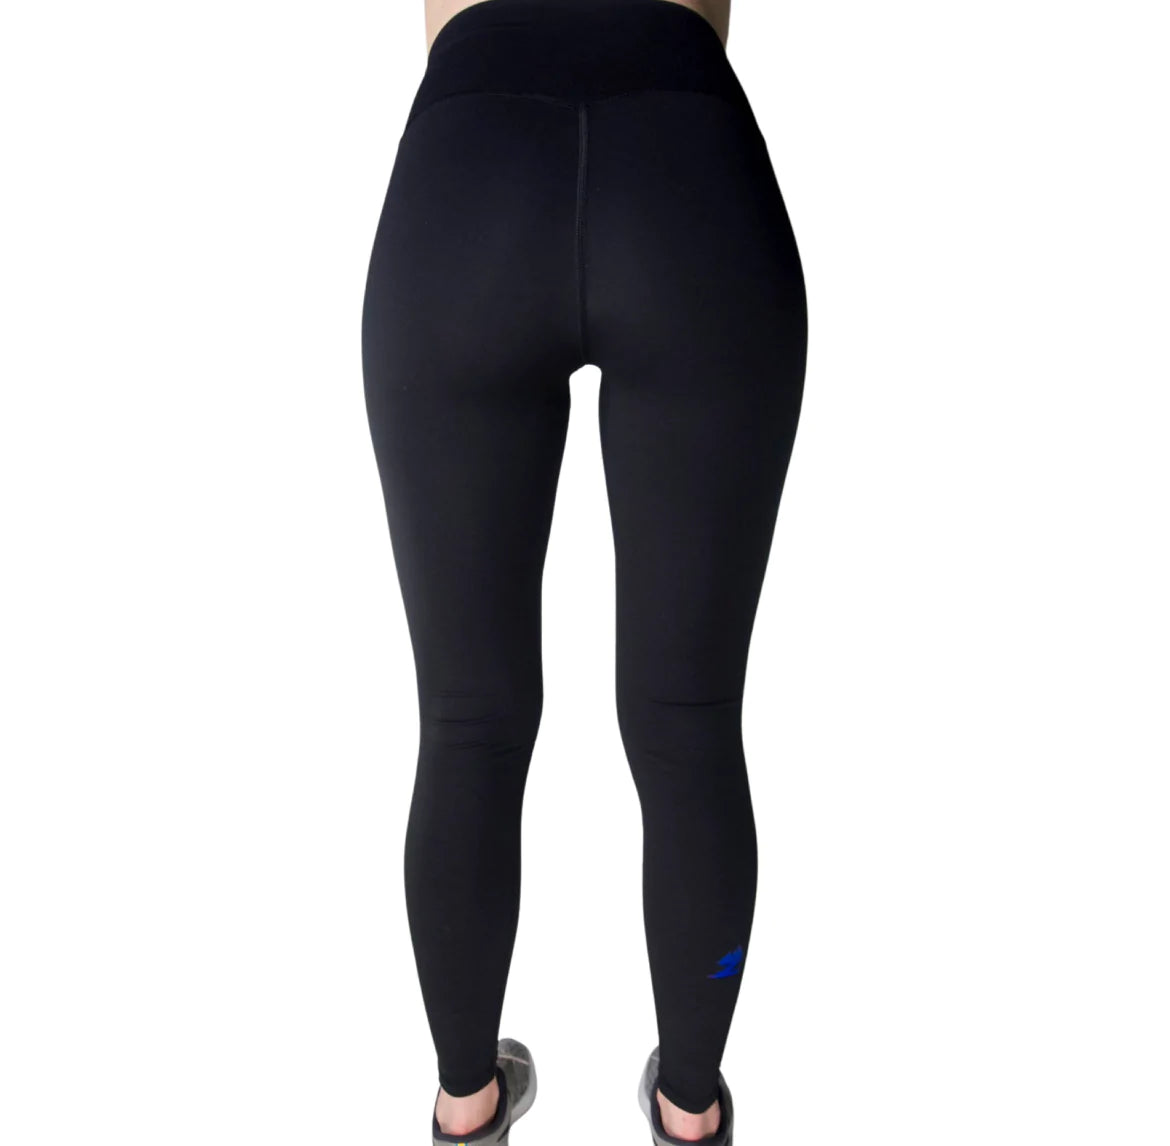 Z Series Women's High - Rise - Polyester Compression Pant